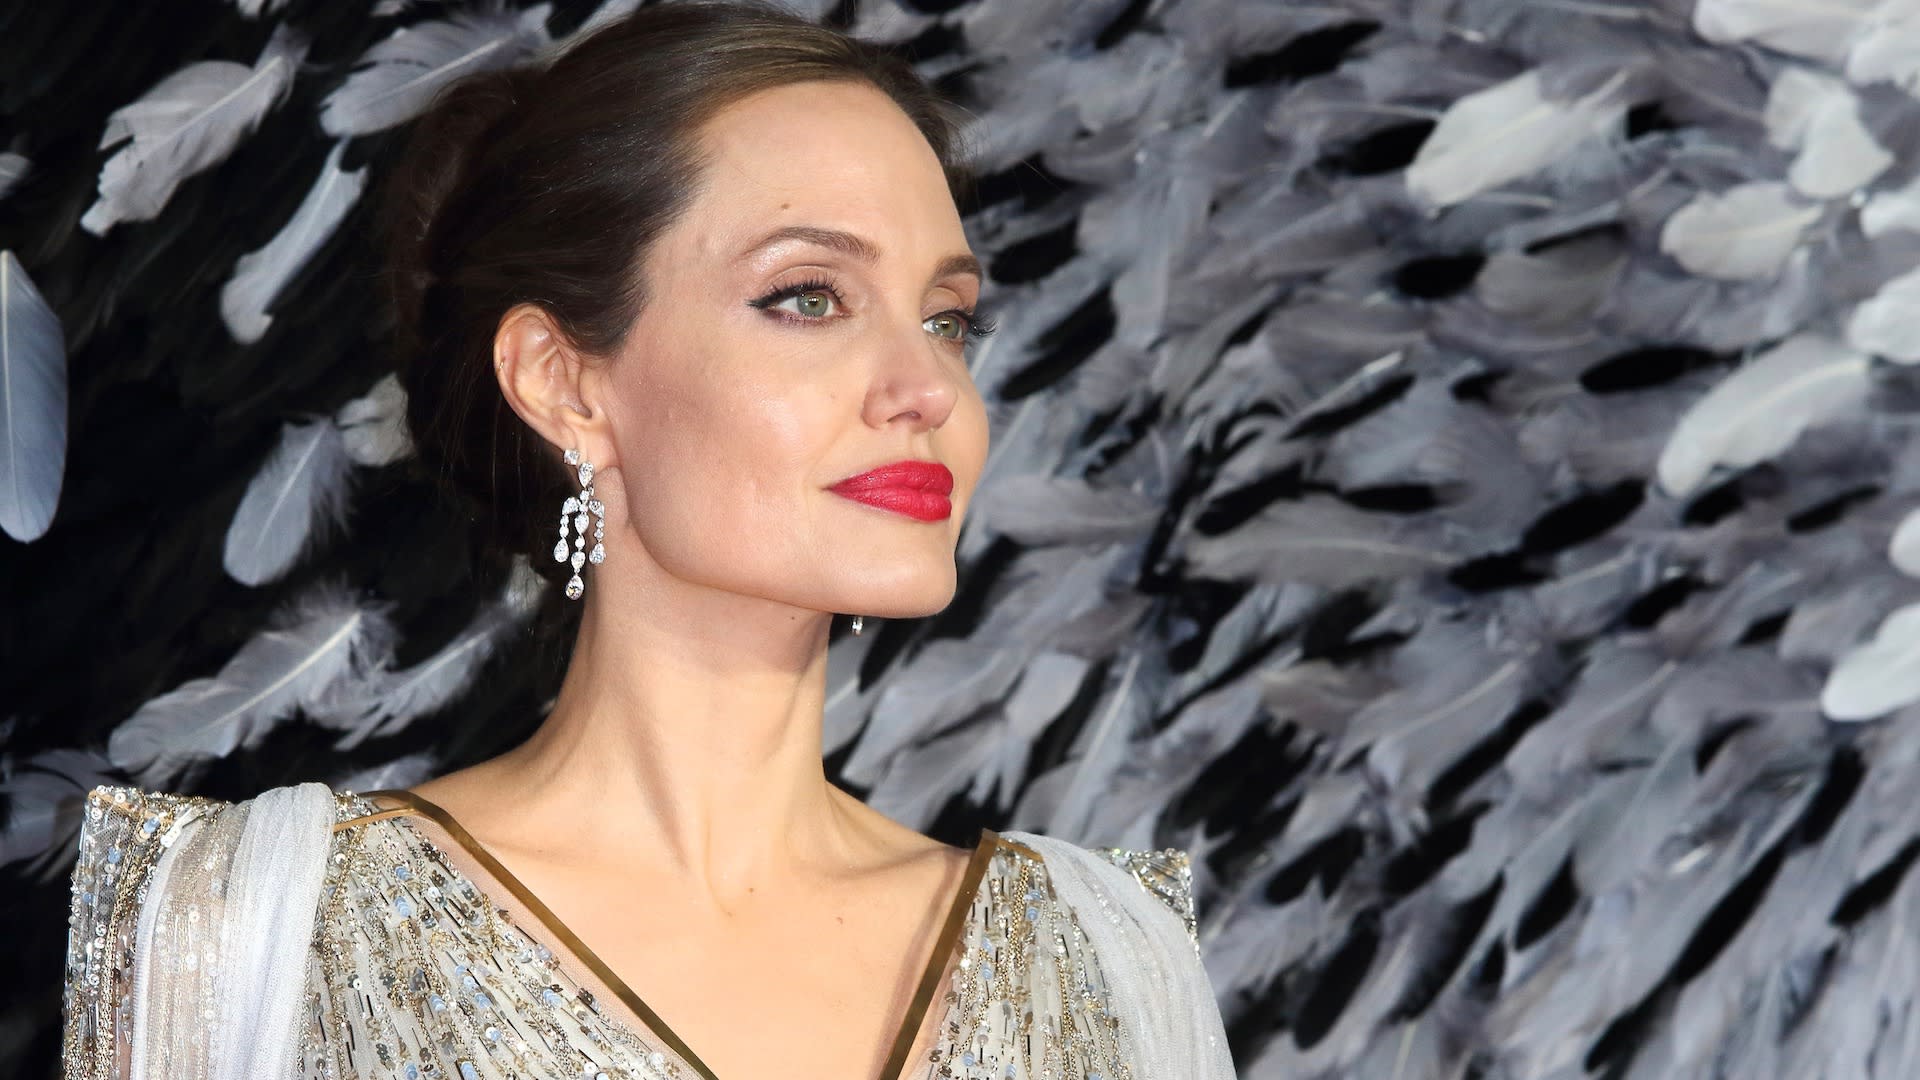 Angelina Jolie claims she has ‘evidence’ of alleged domestic violence from Brad Pitt